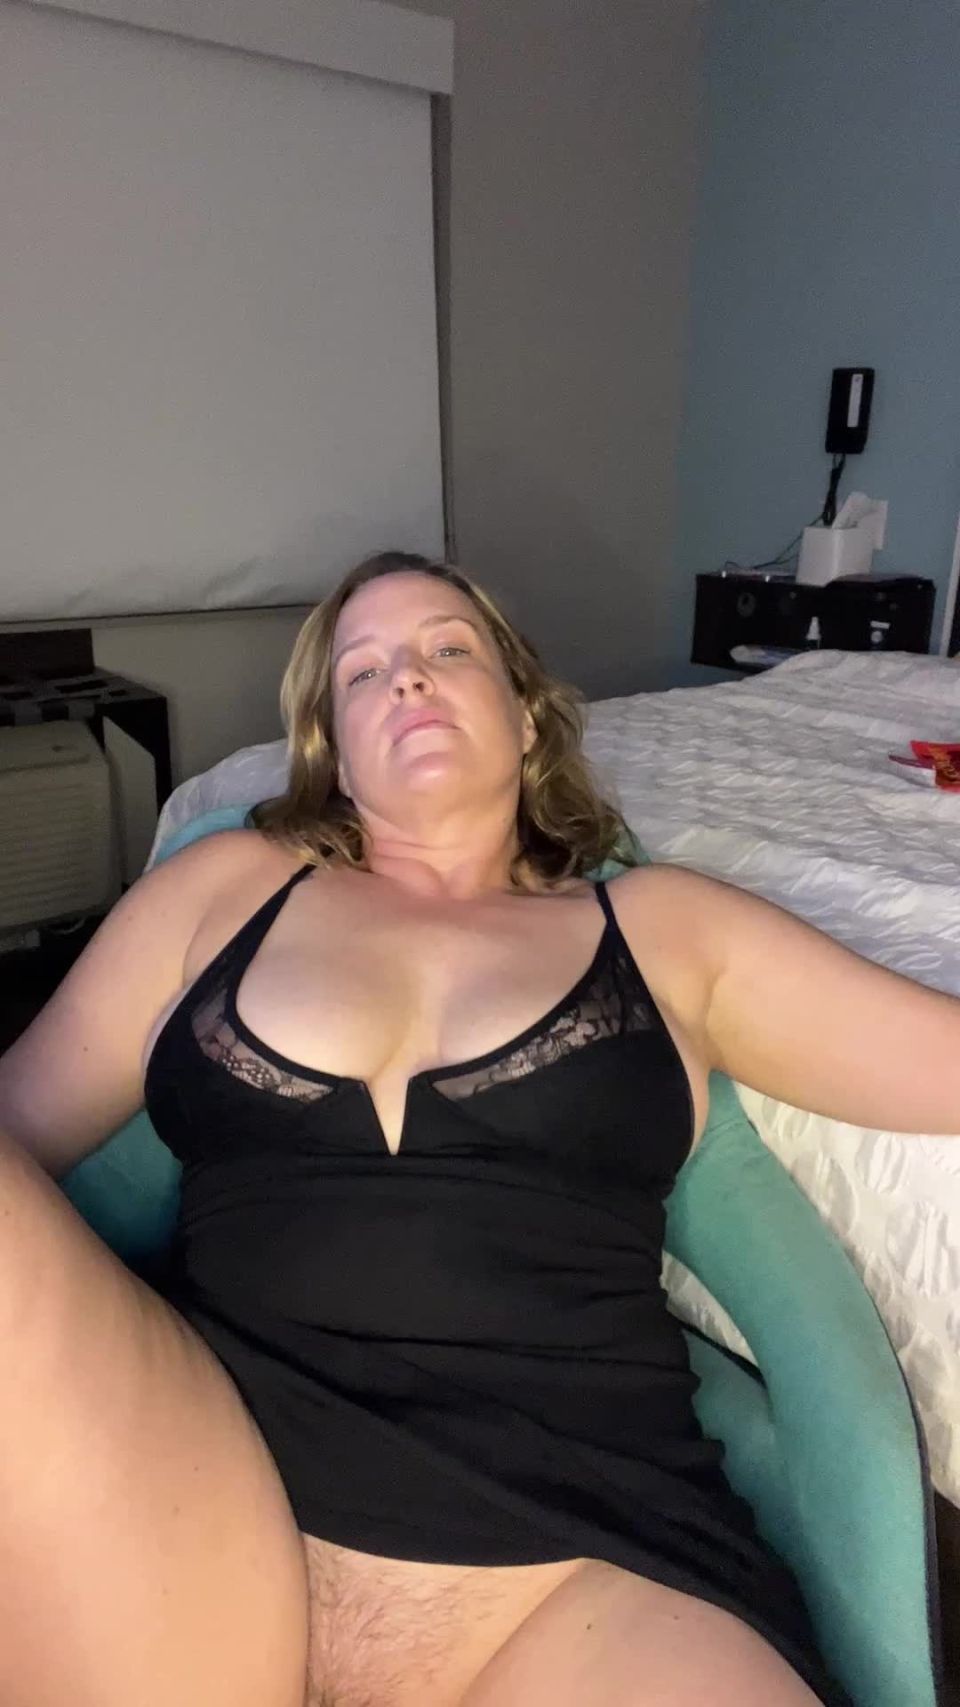 PilatesMilf - Squirting all Over my Floor and Cumming Everywhere - Solofemale